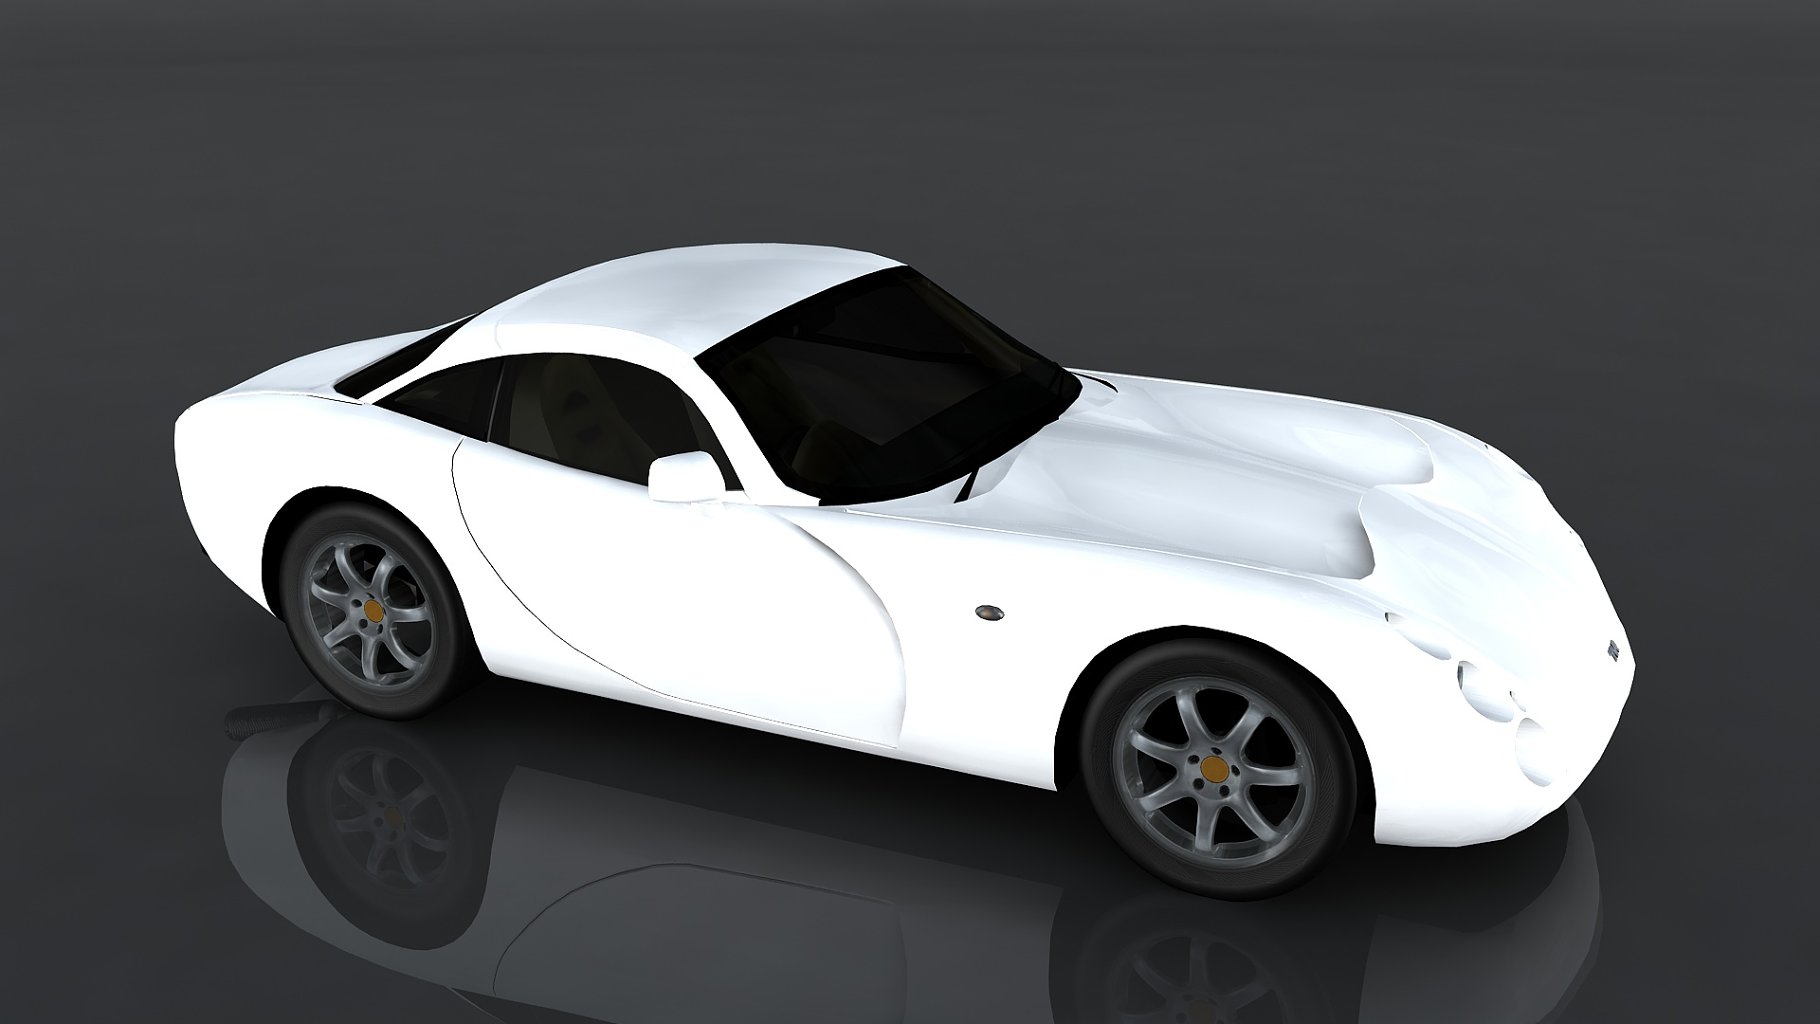 White 2001 tvr tuscan s mockup on a dark gray background.